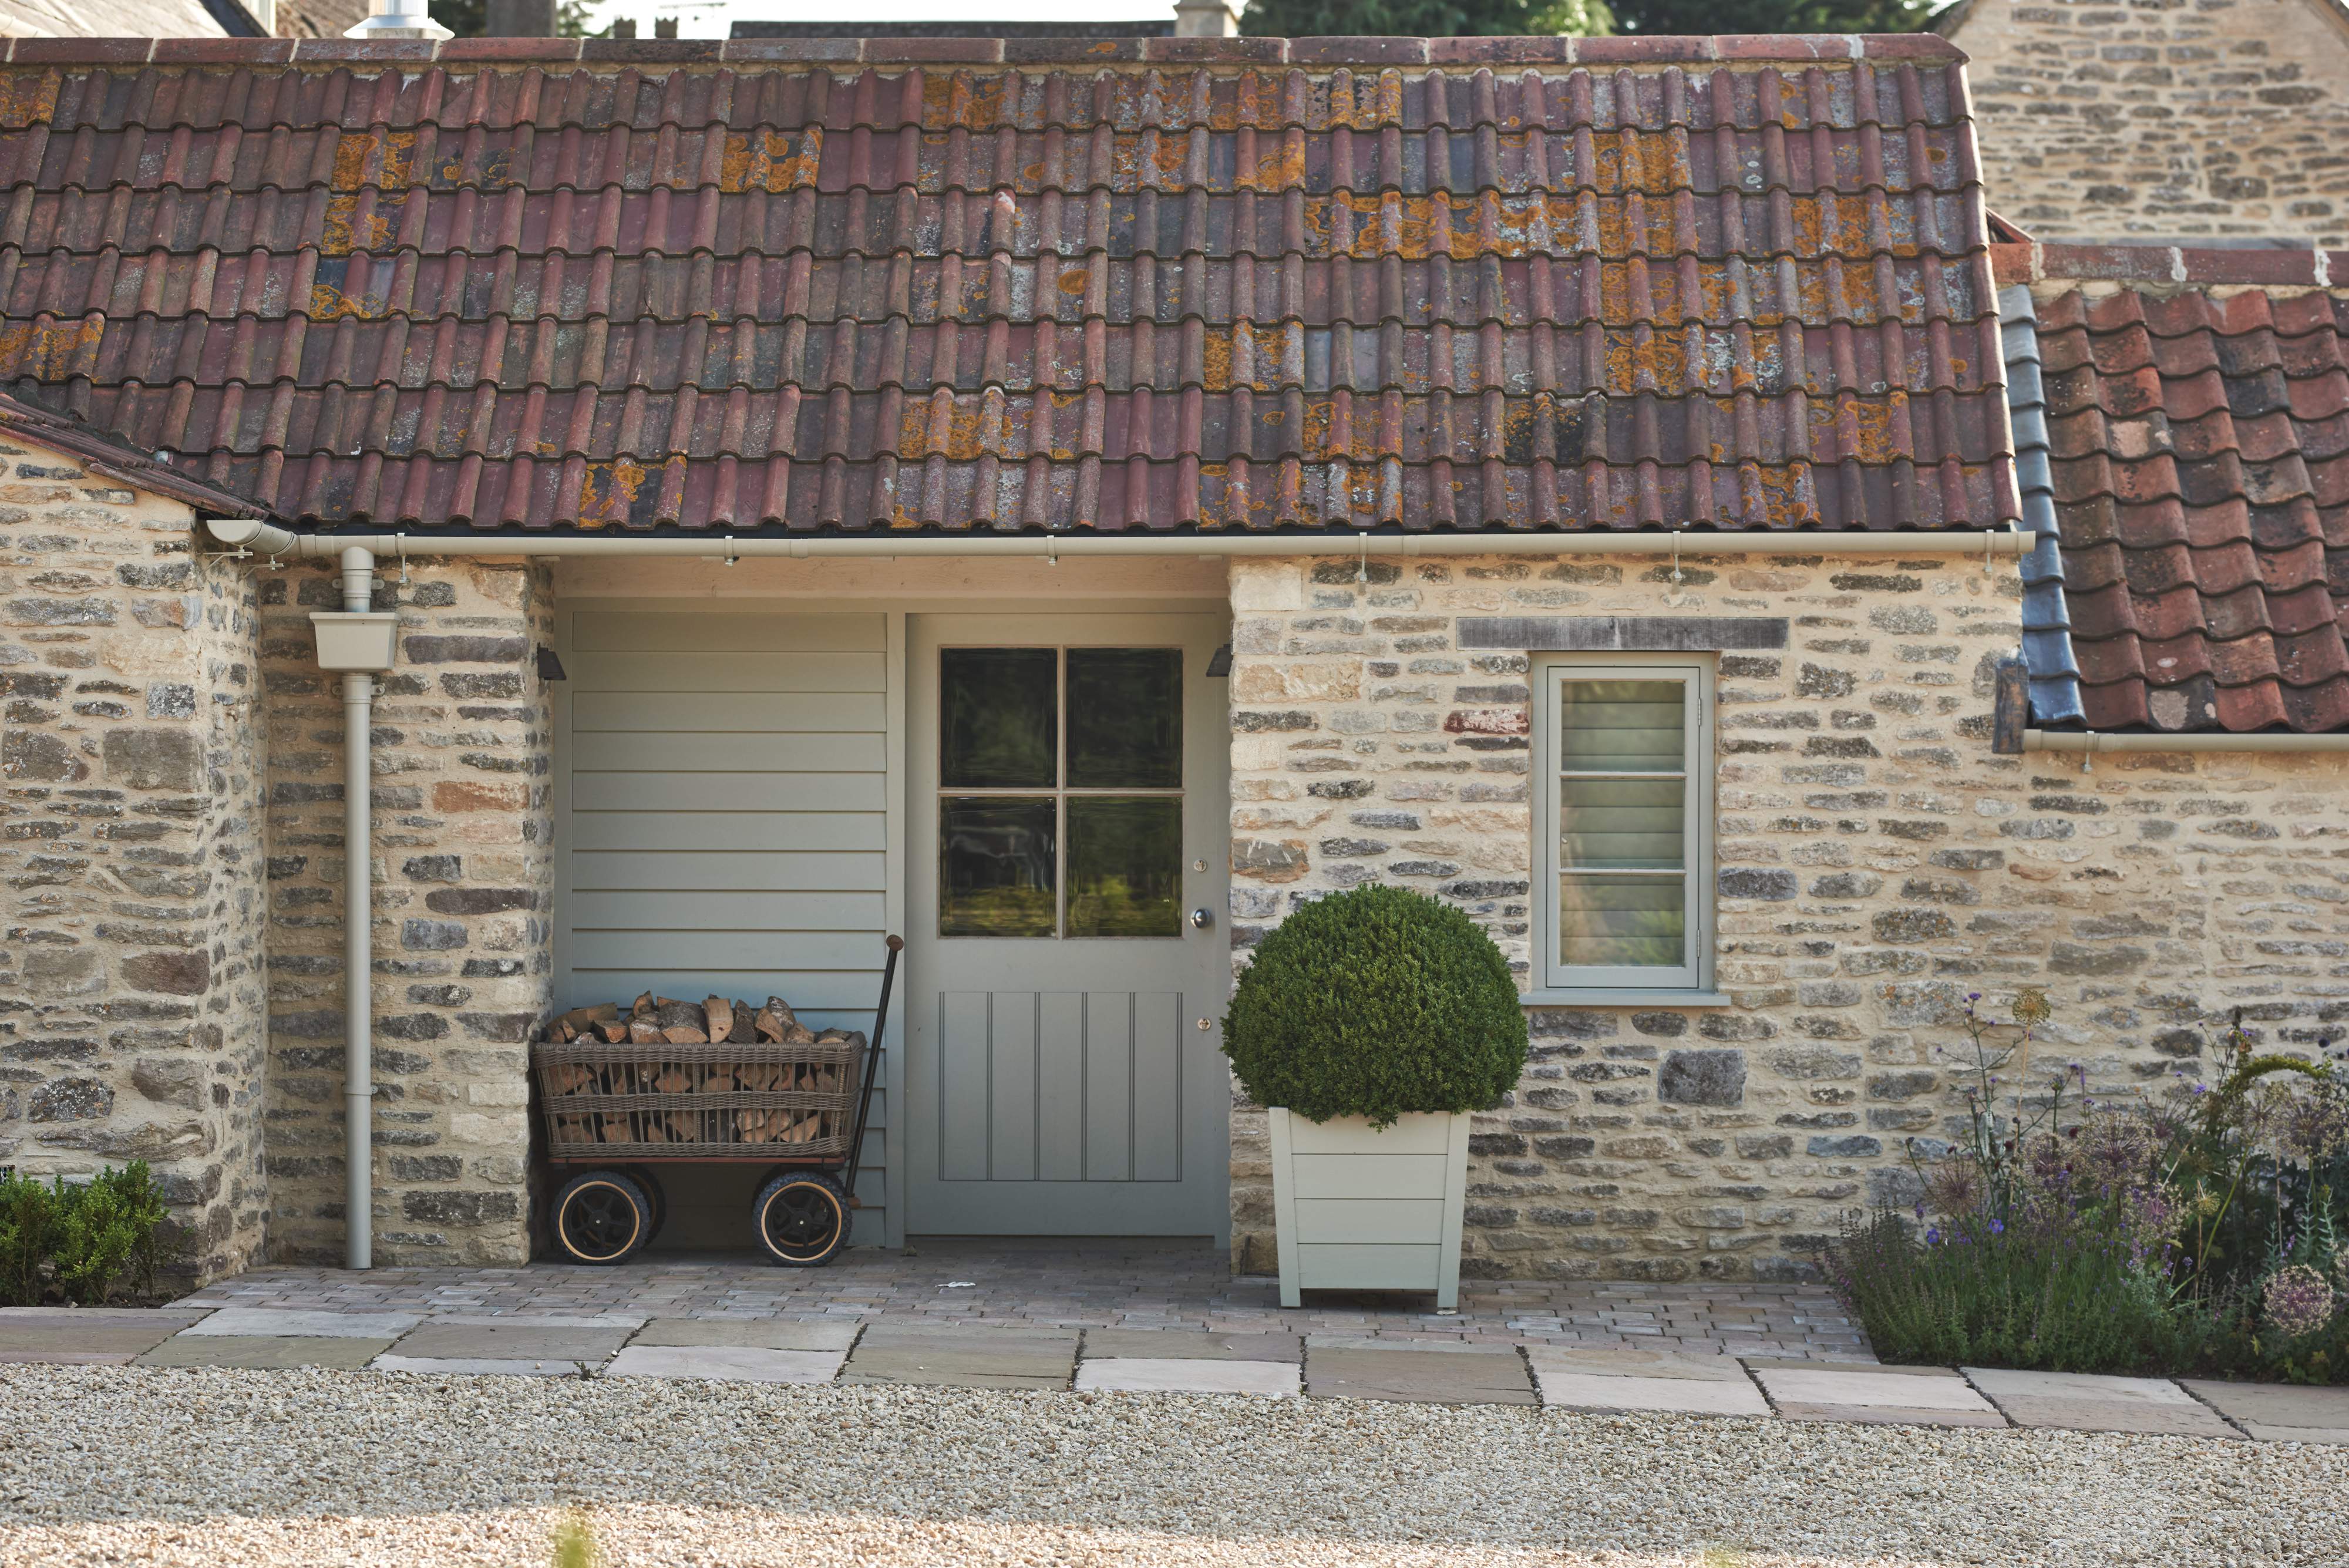 Sims Hilditch Country Studio based in the Cotswolds